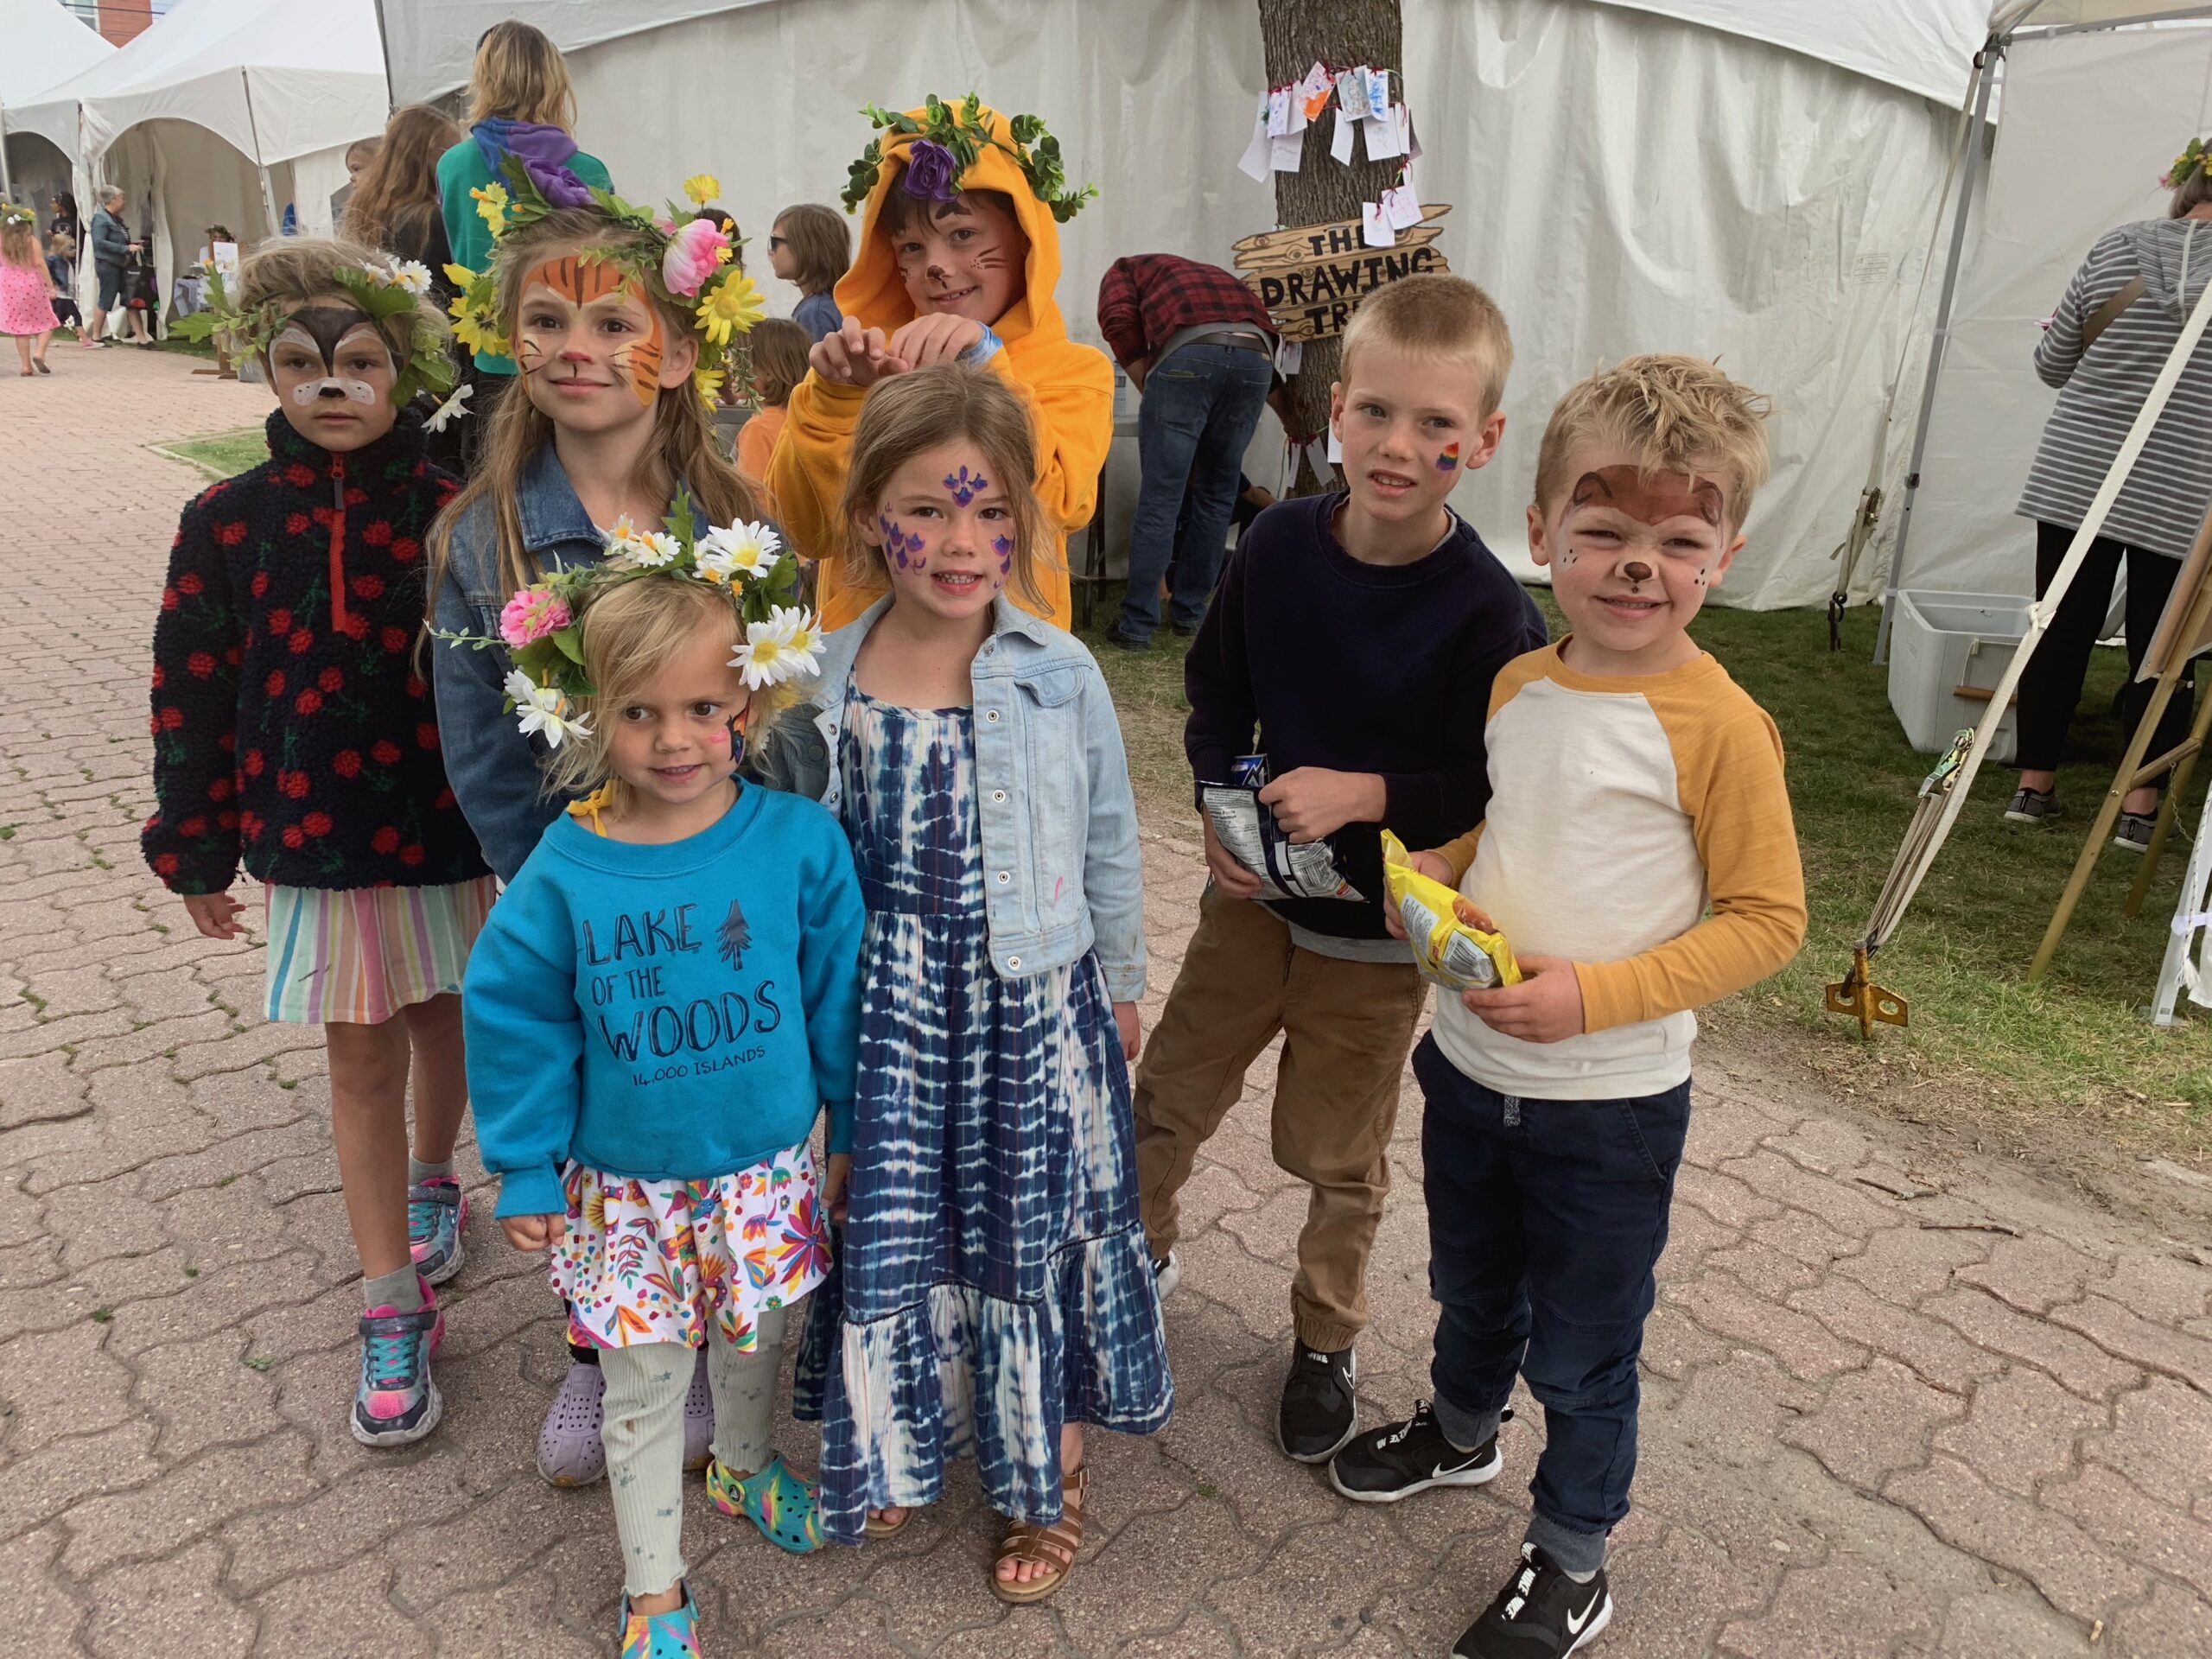 7 young children with their faces painted at ArtsFest